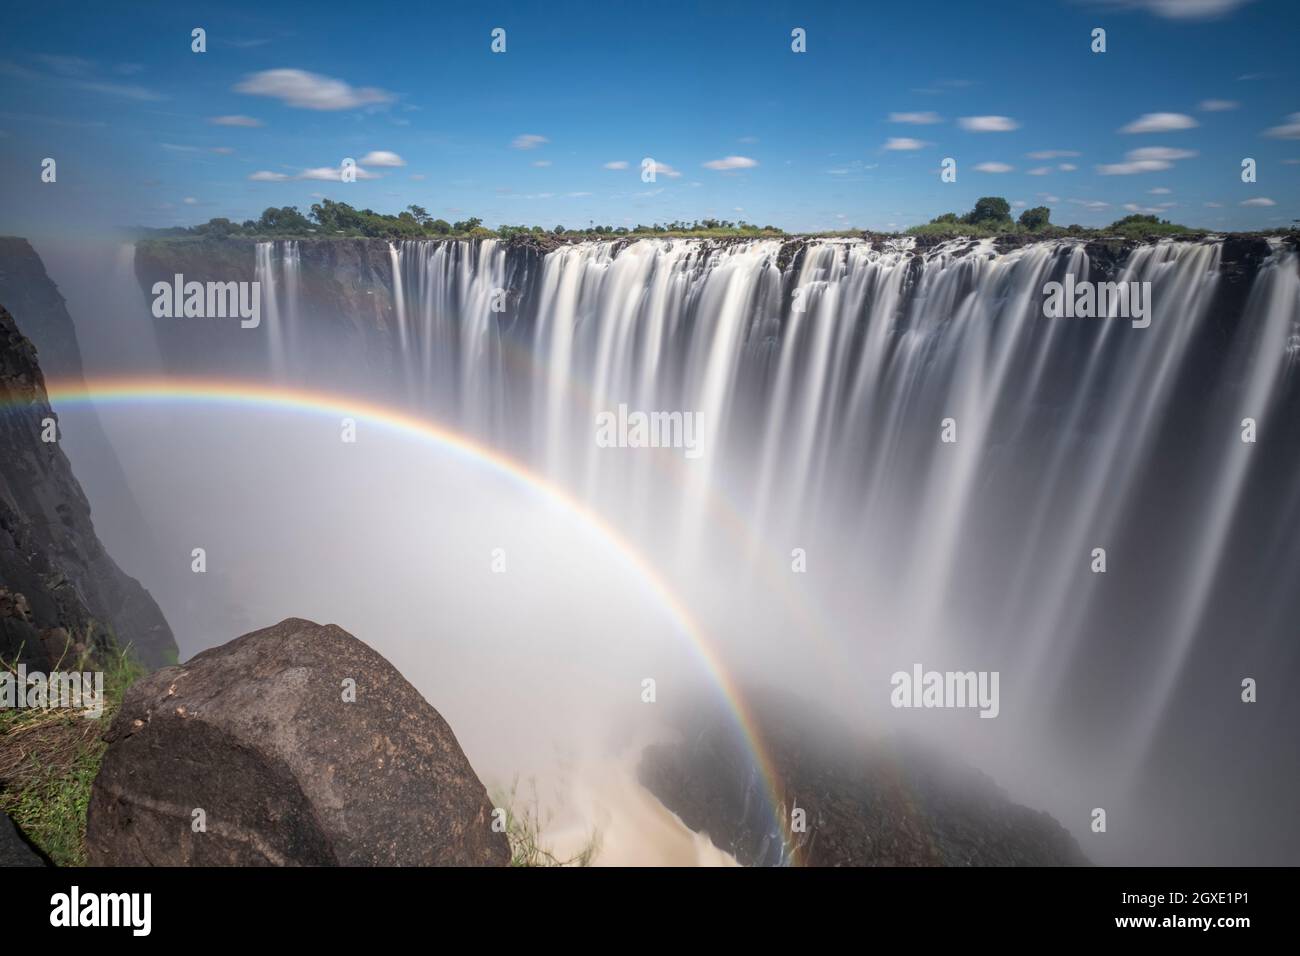 Victoria Falls long Gorge waterfalls with rainbow. Victoria Falls National Park, Zimbabwe, Africa Stock Photo